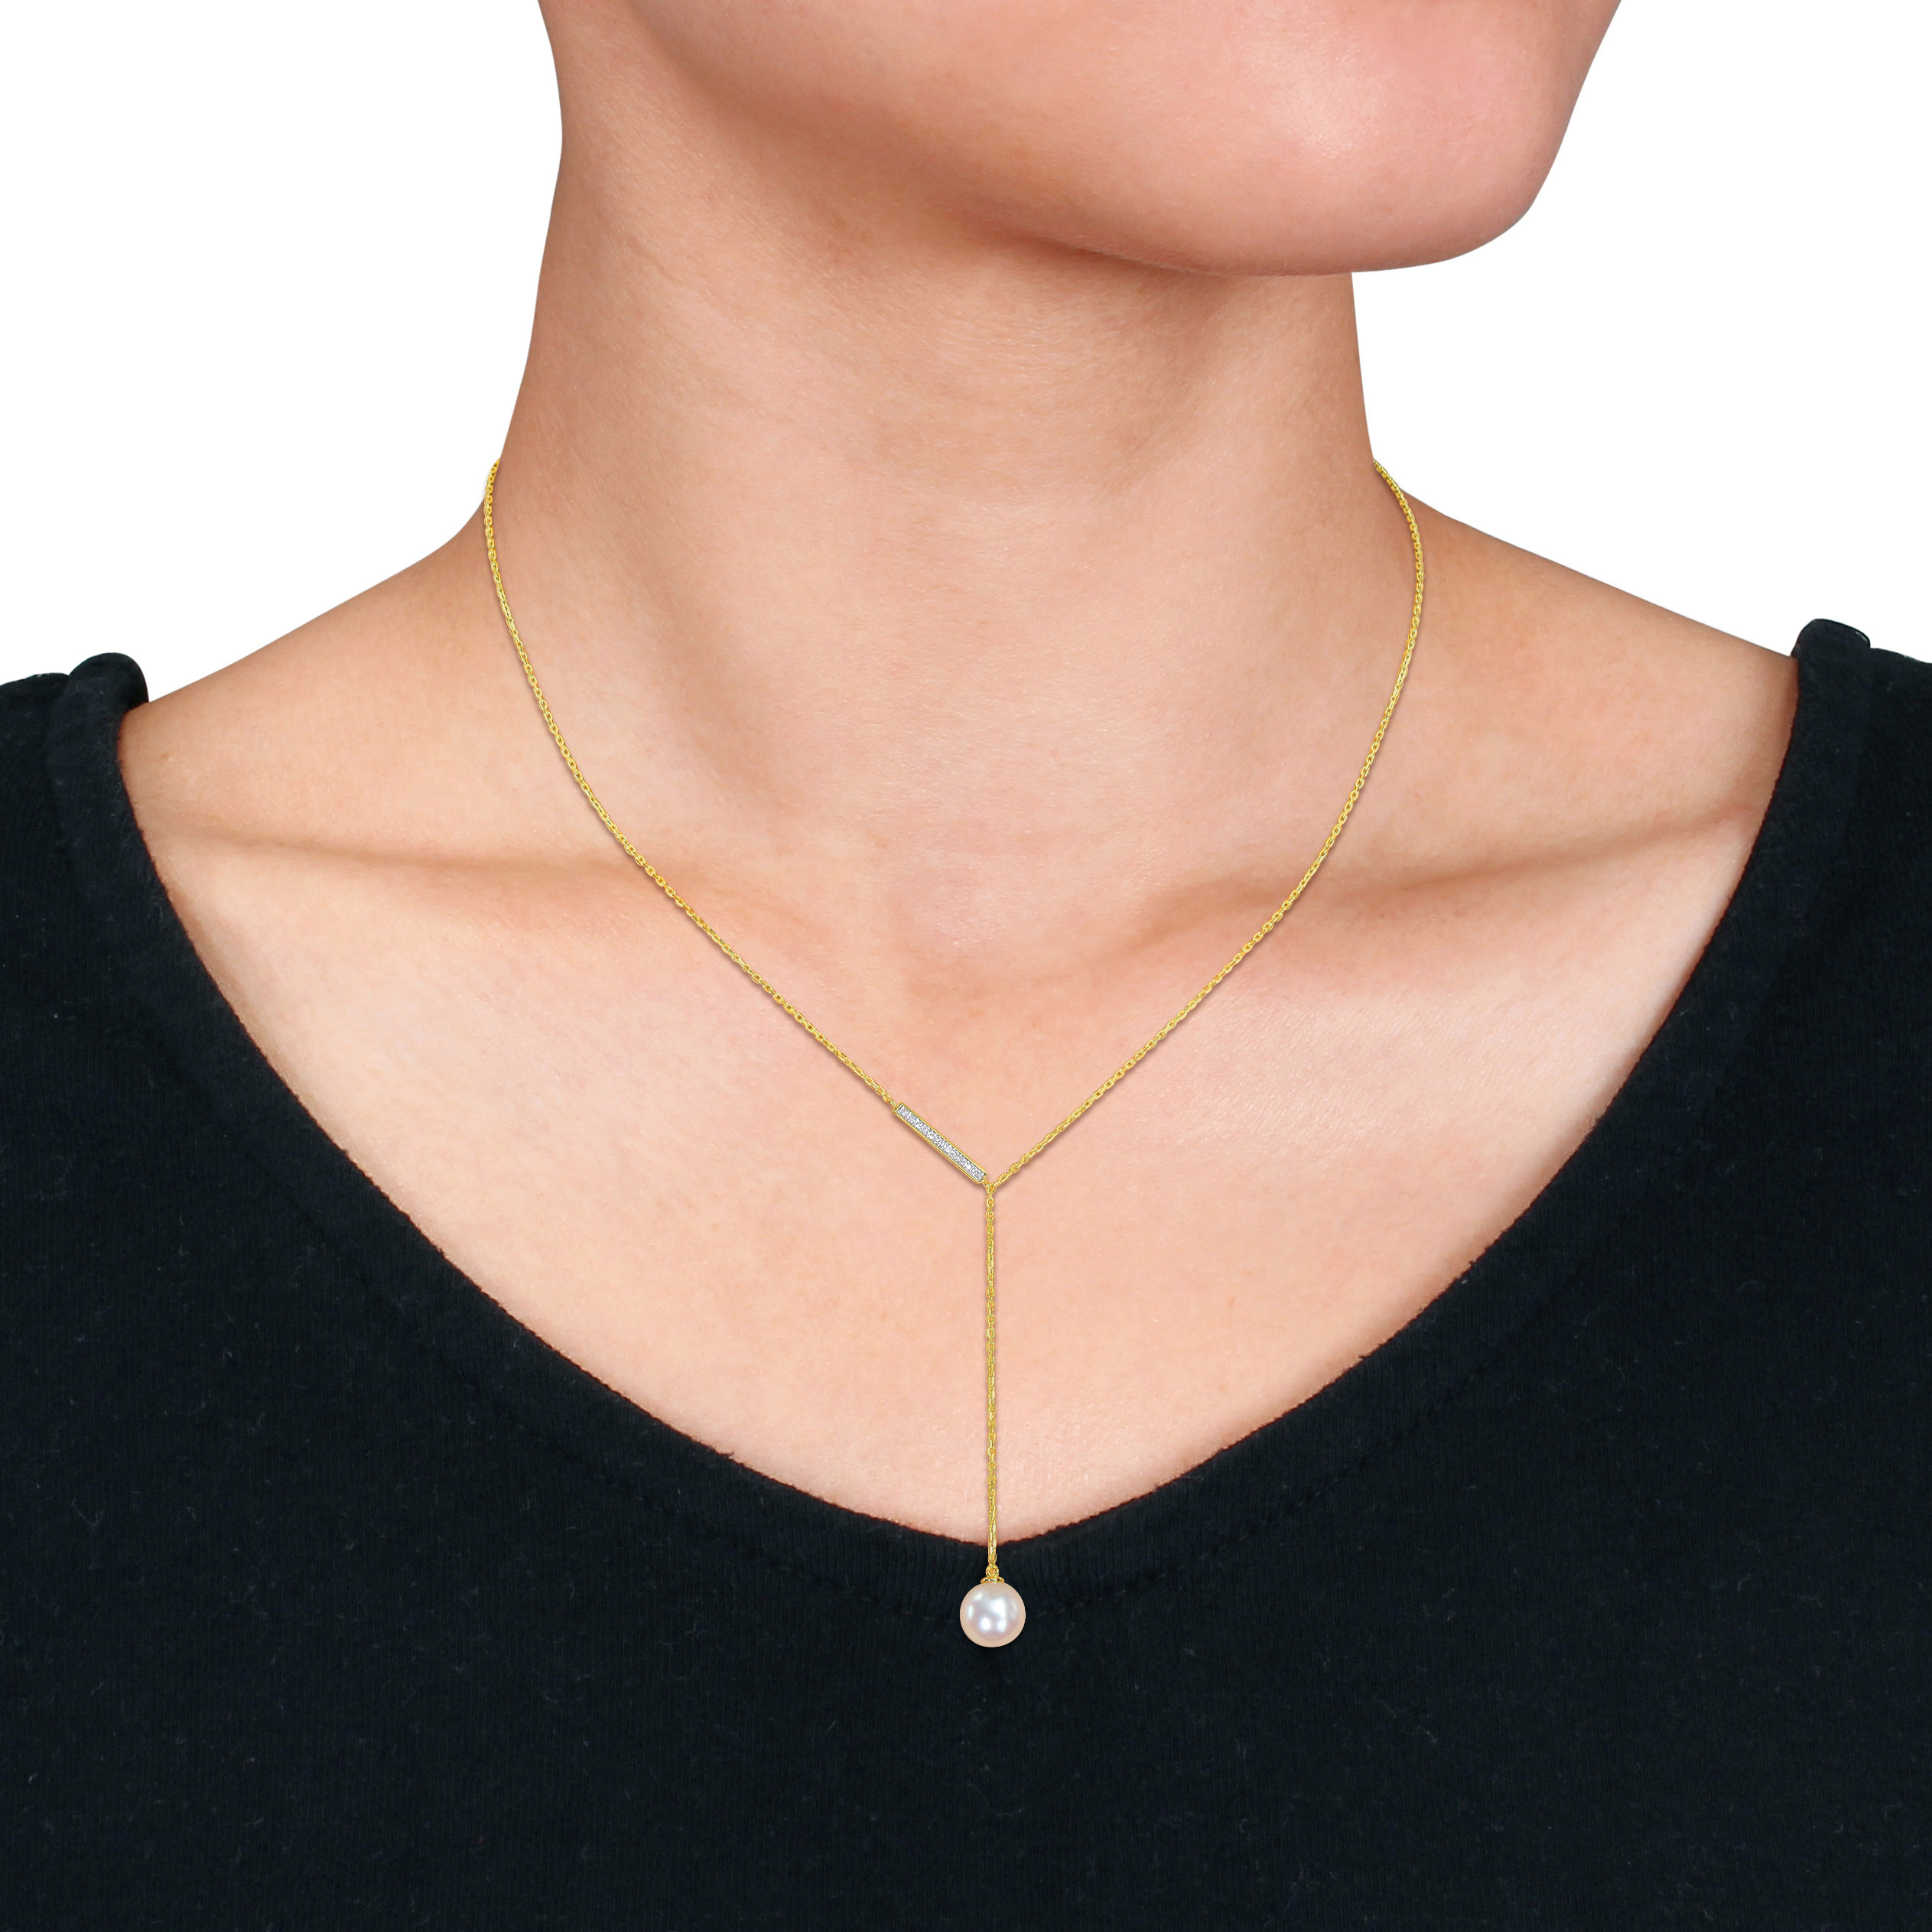 8-8.5 MM Cultured Freshwater Pearl and Diamond Accent Lariant Necklace in 10k Yellow Gold - 17 in.